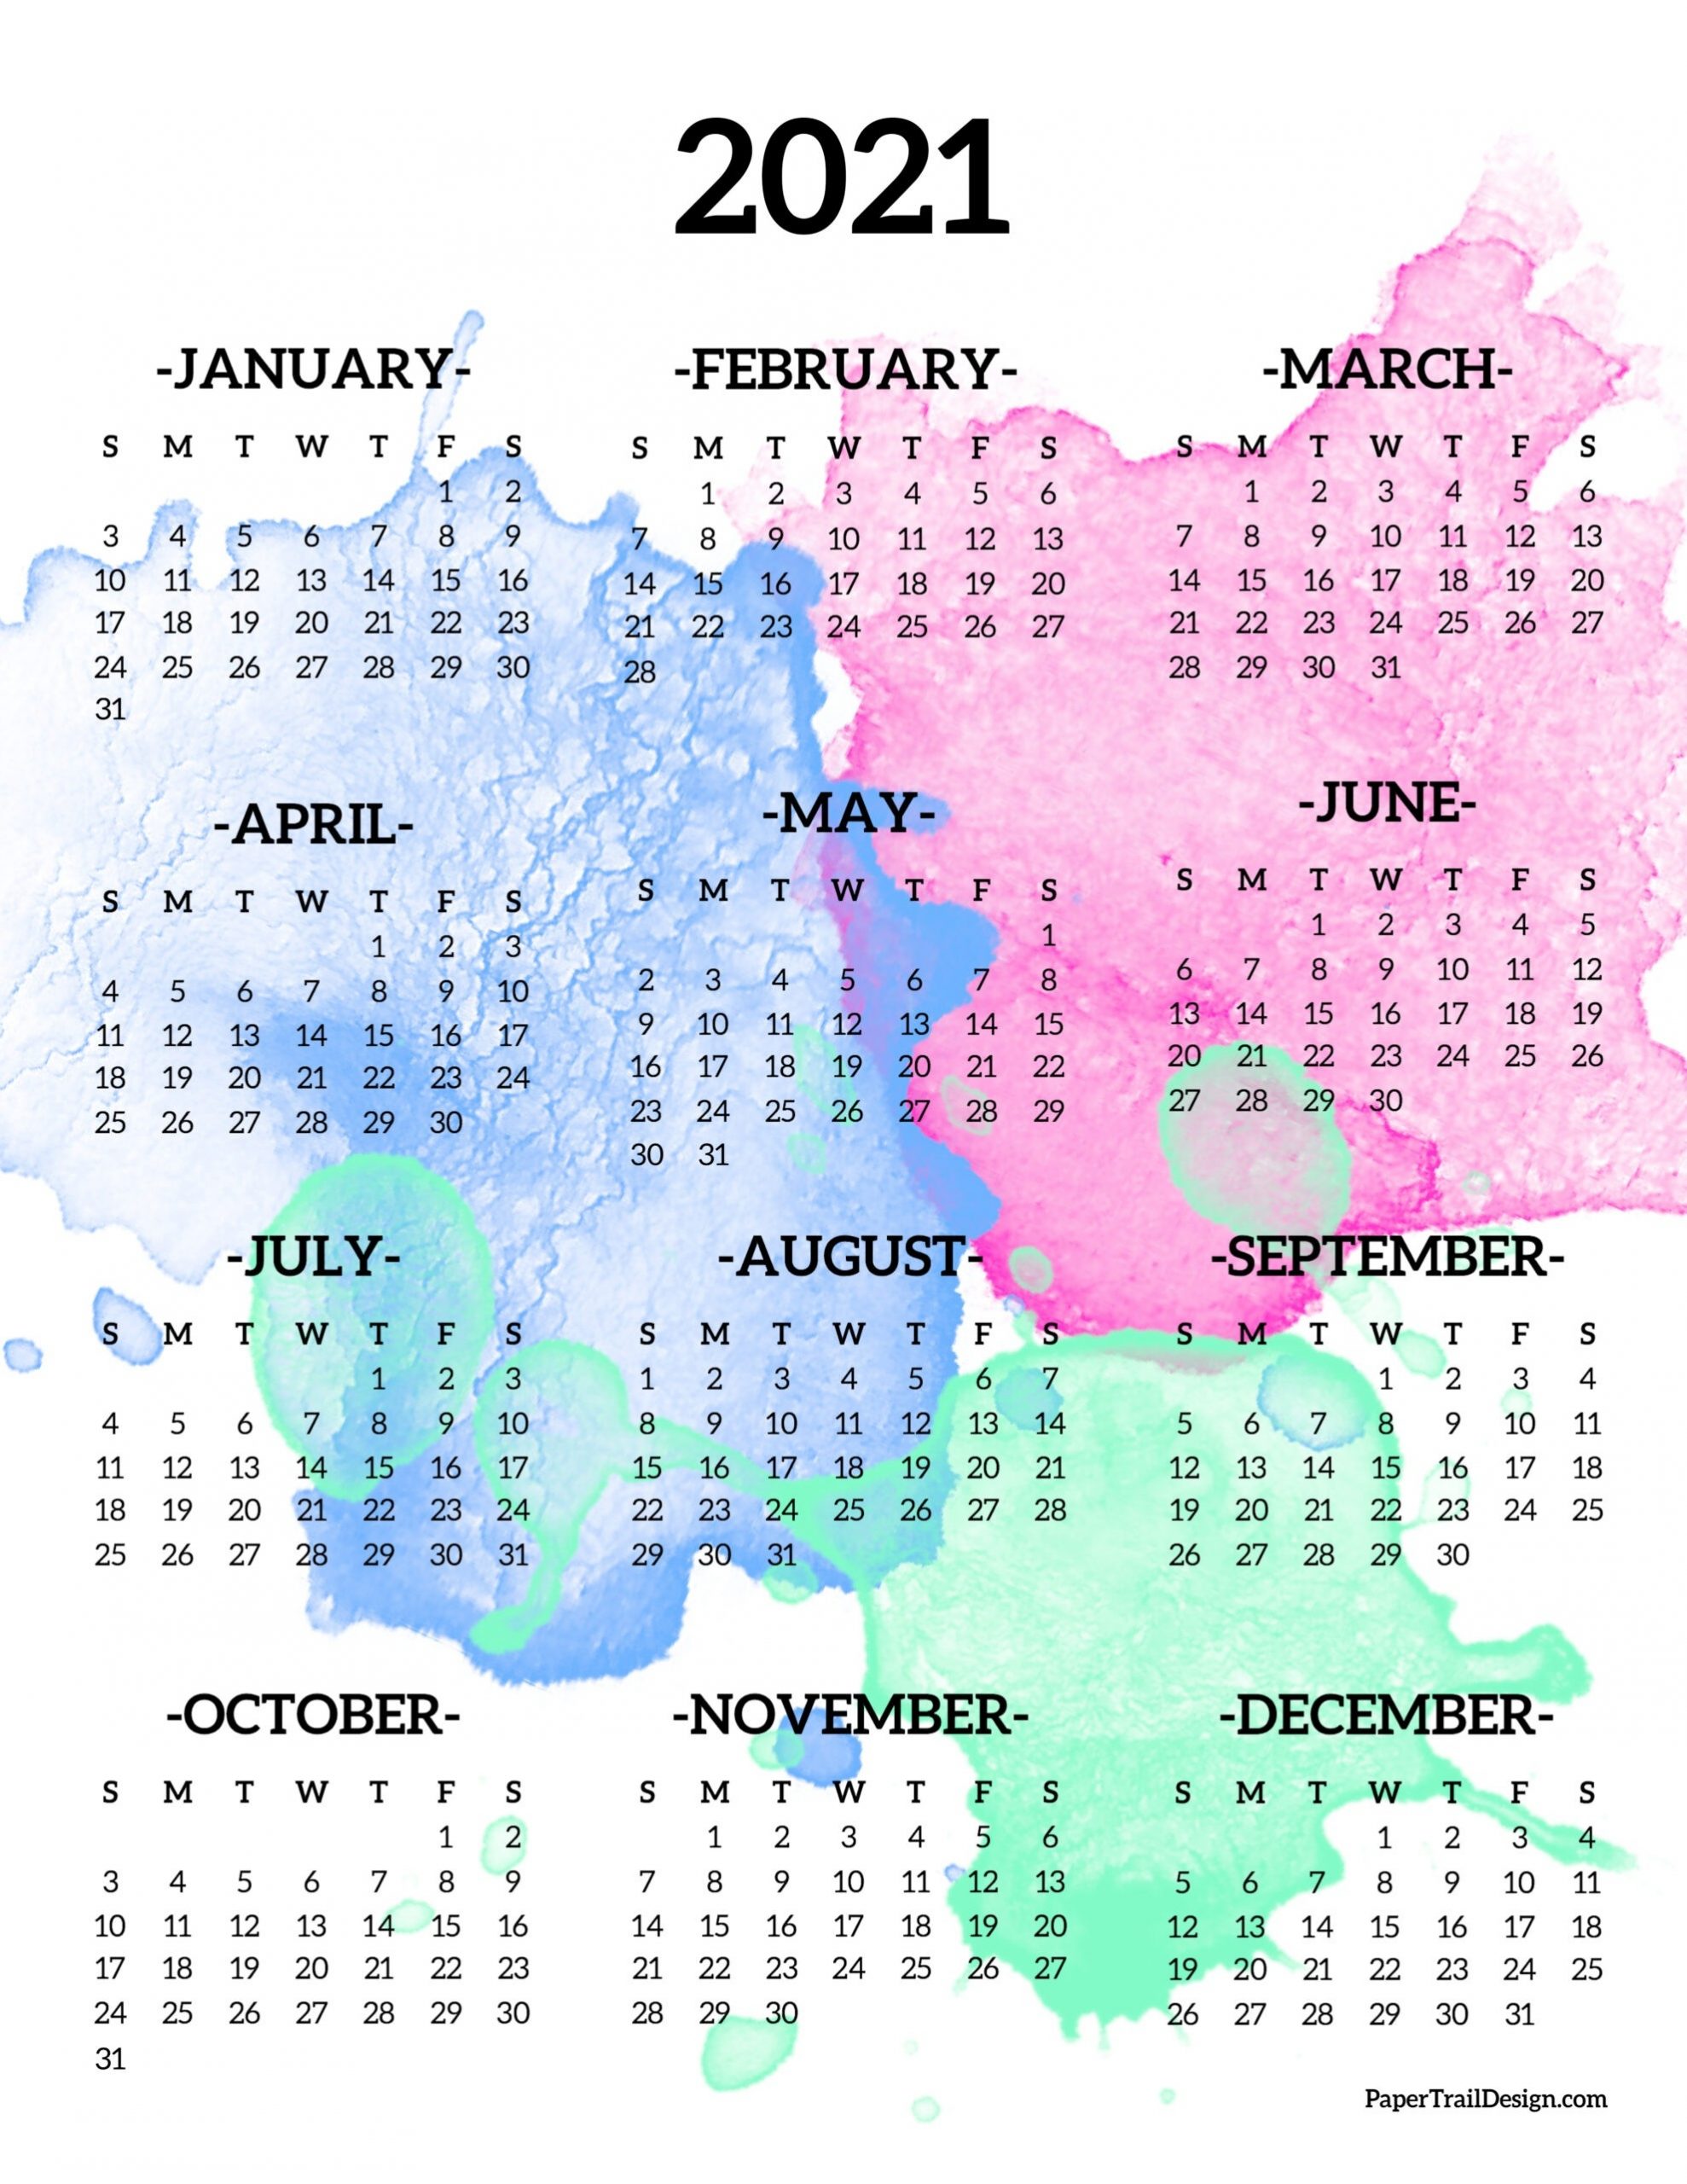 Calendar 2021 Printable One Page | Paper Trail Design-2021 Year At A Glance Free Calendar